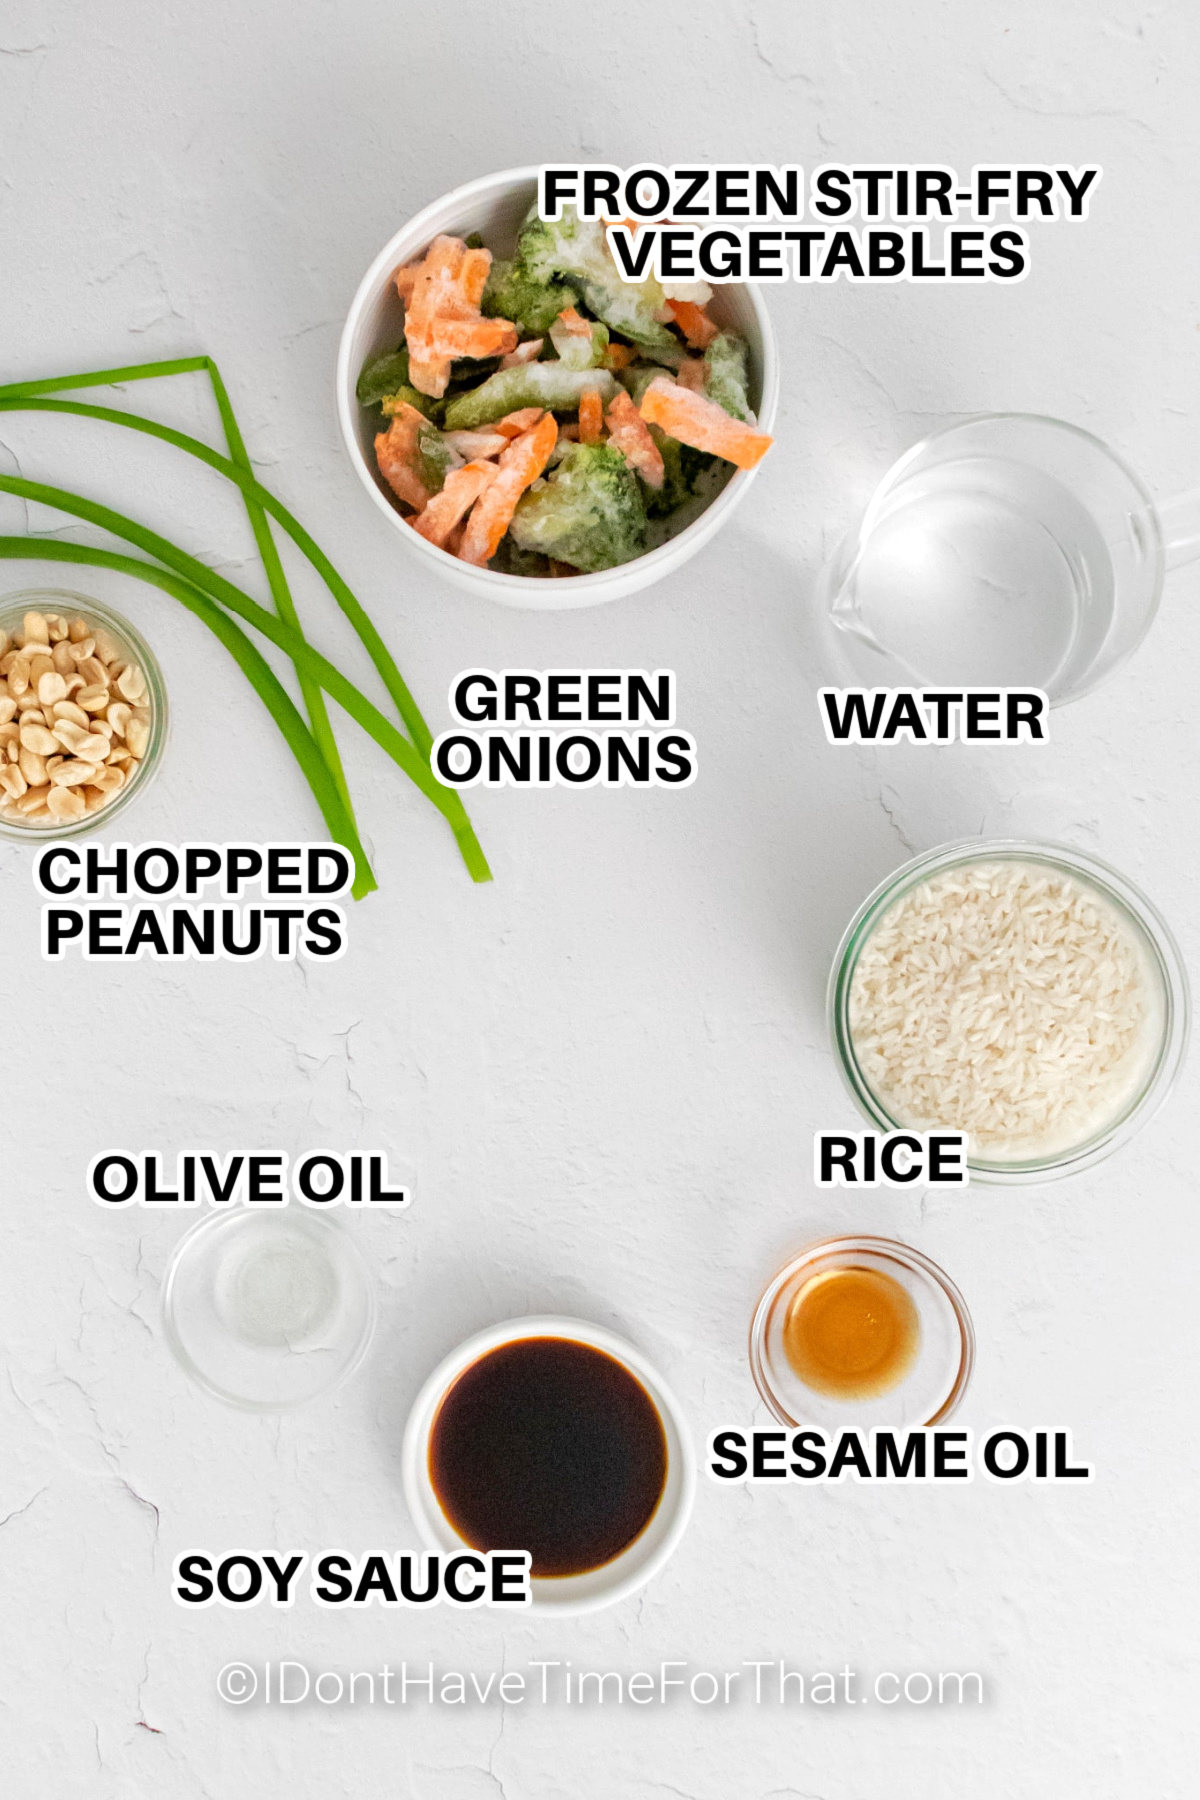 Ingredients to make instant pot vegetable fried rice labeled: frozen stir-fry vegetables, water, rice, sesame oil, soy sauce, olive oil, chopped peanuts, and green onions